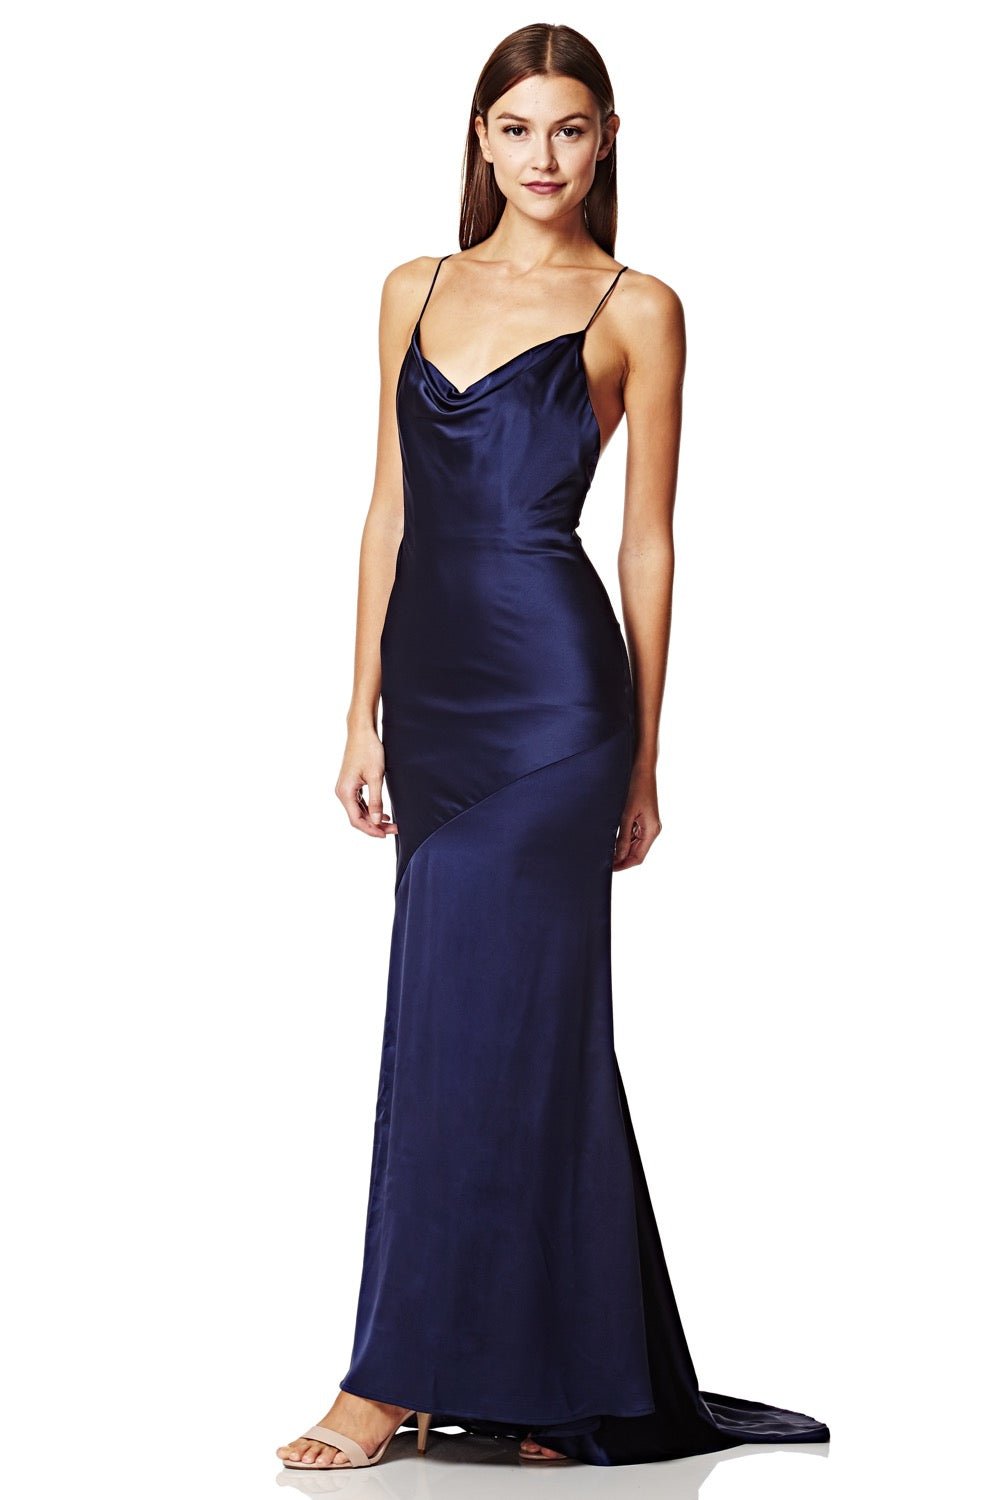 Jarlo Roxanne cowl neck navy satin maxi dress with open back